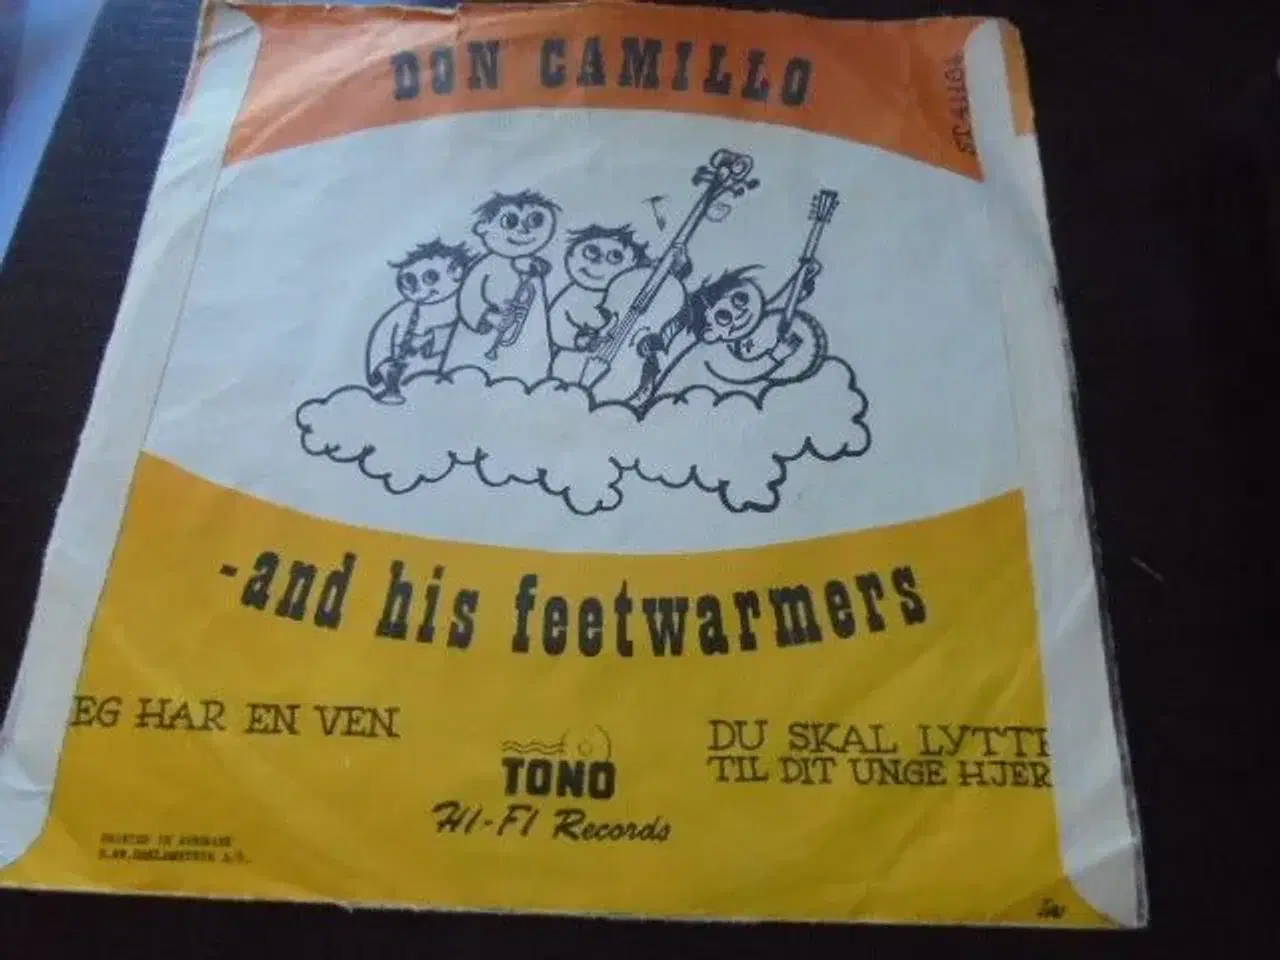 Billede 2 - Single - Don Camillo and his Footwarmers 